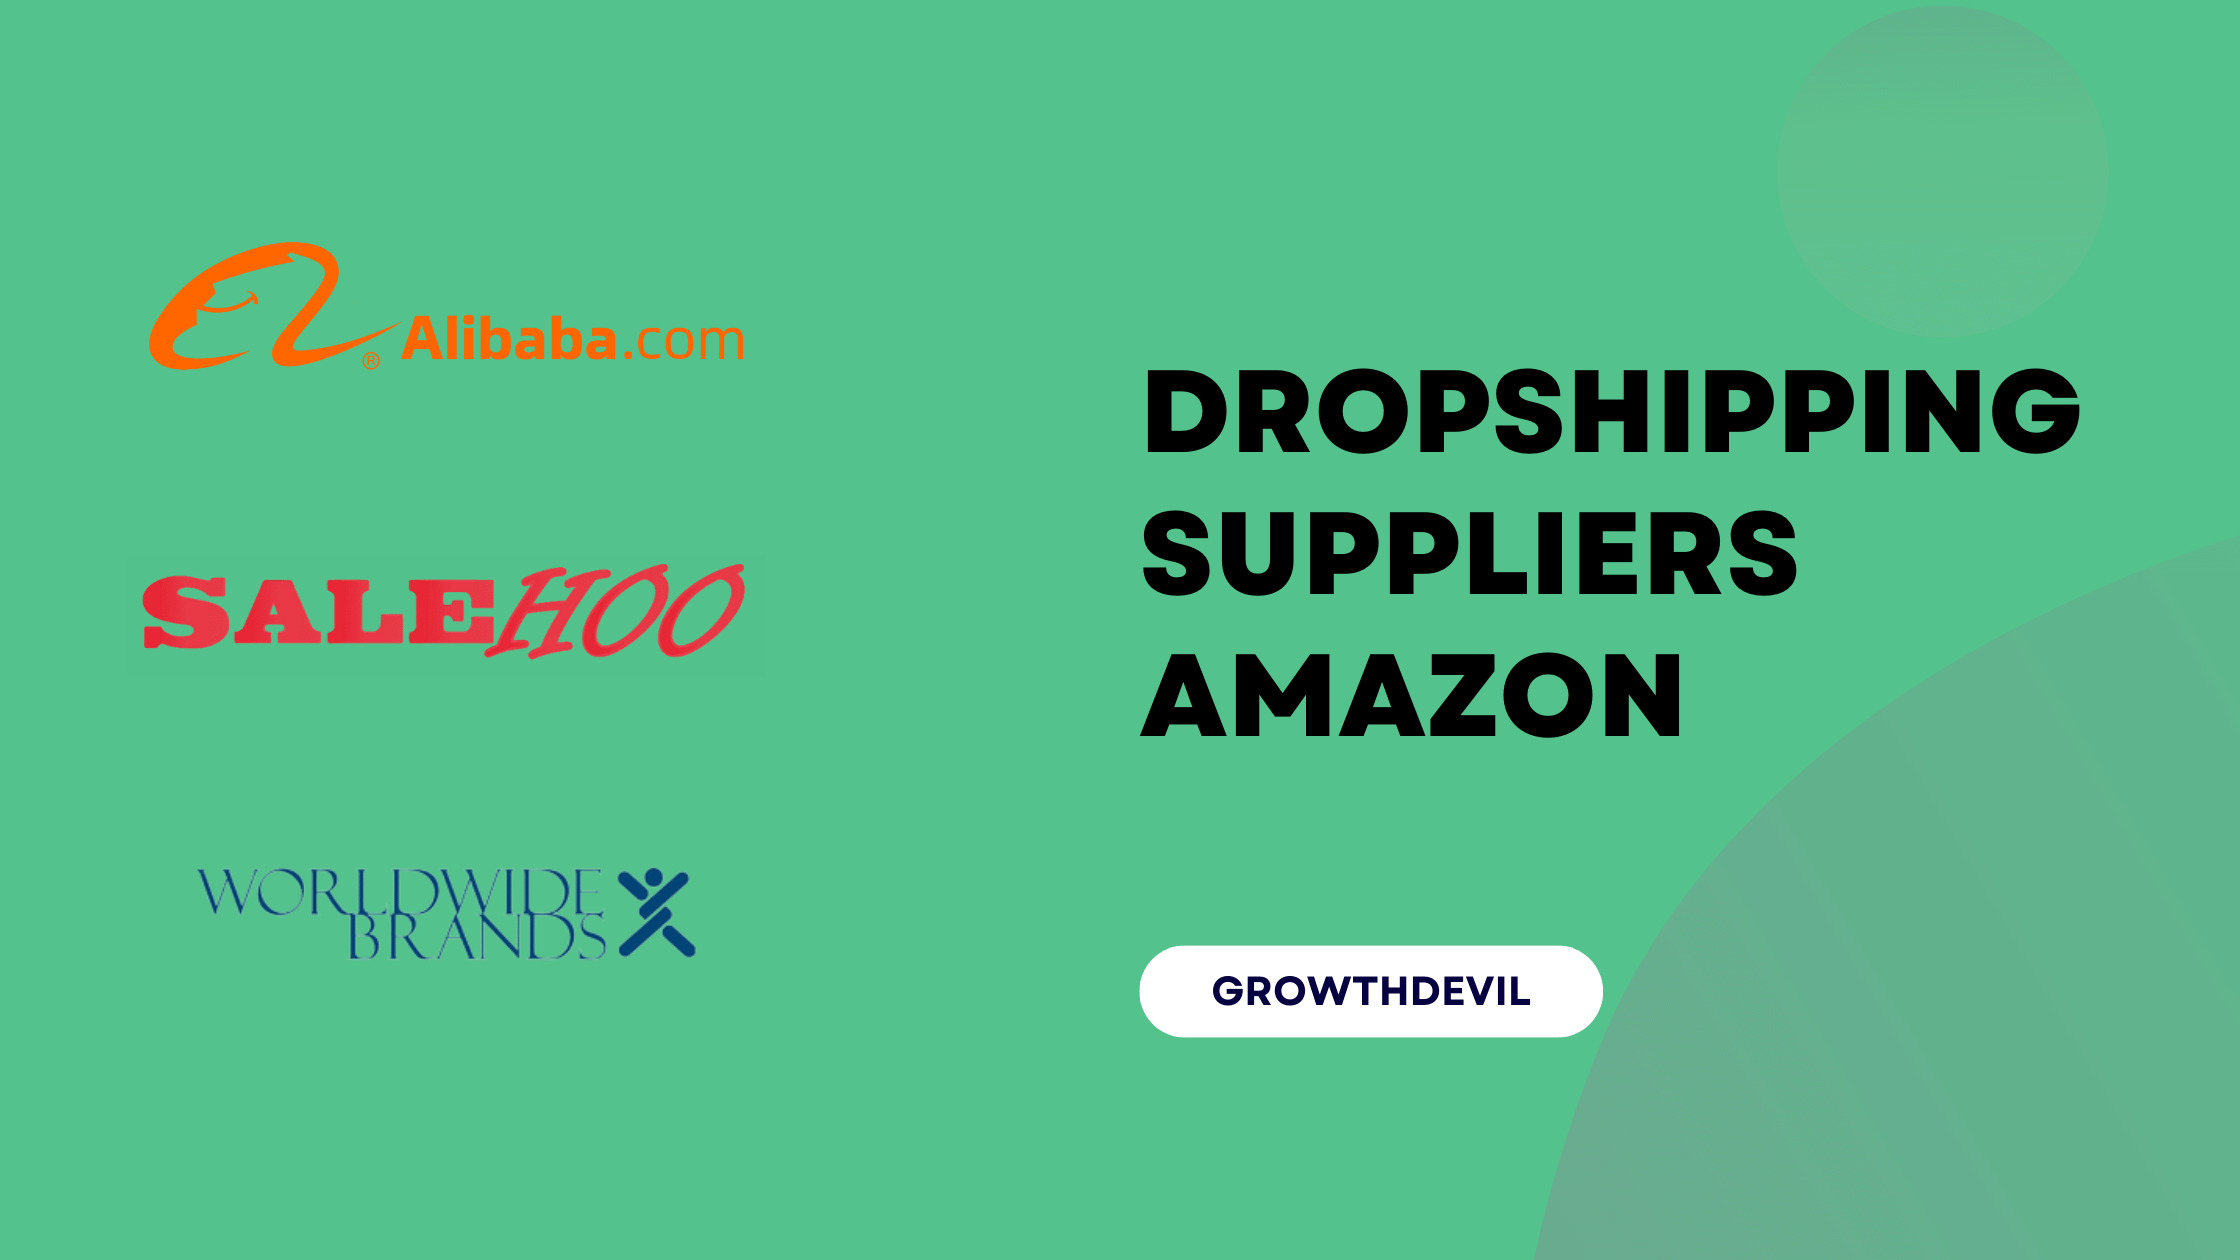 Dropshipping Suppliers Amazon - GrowthDevil